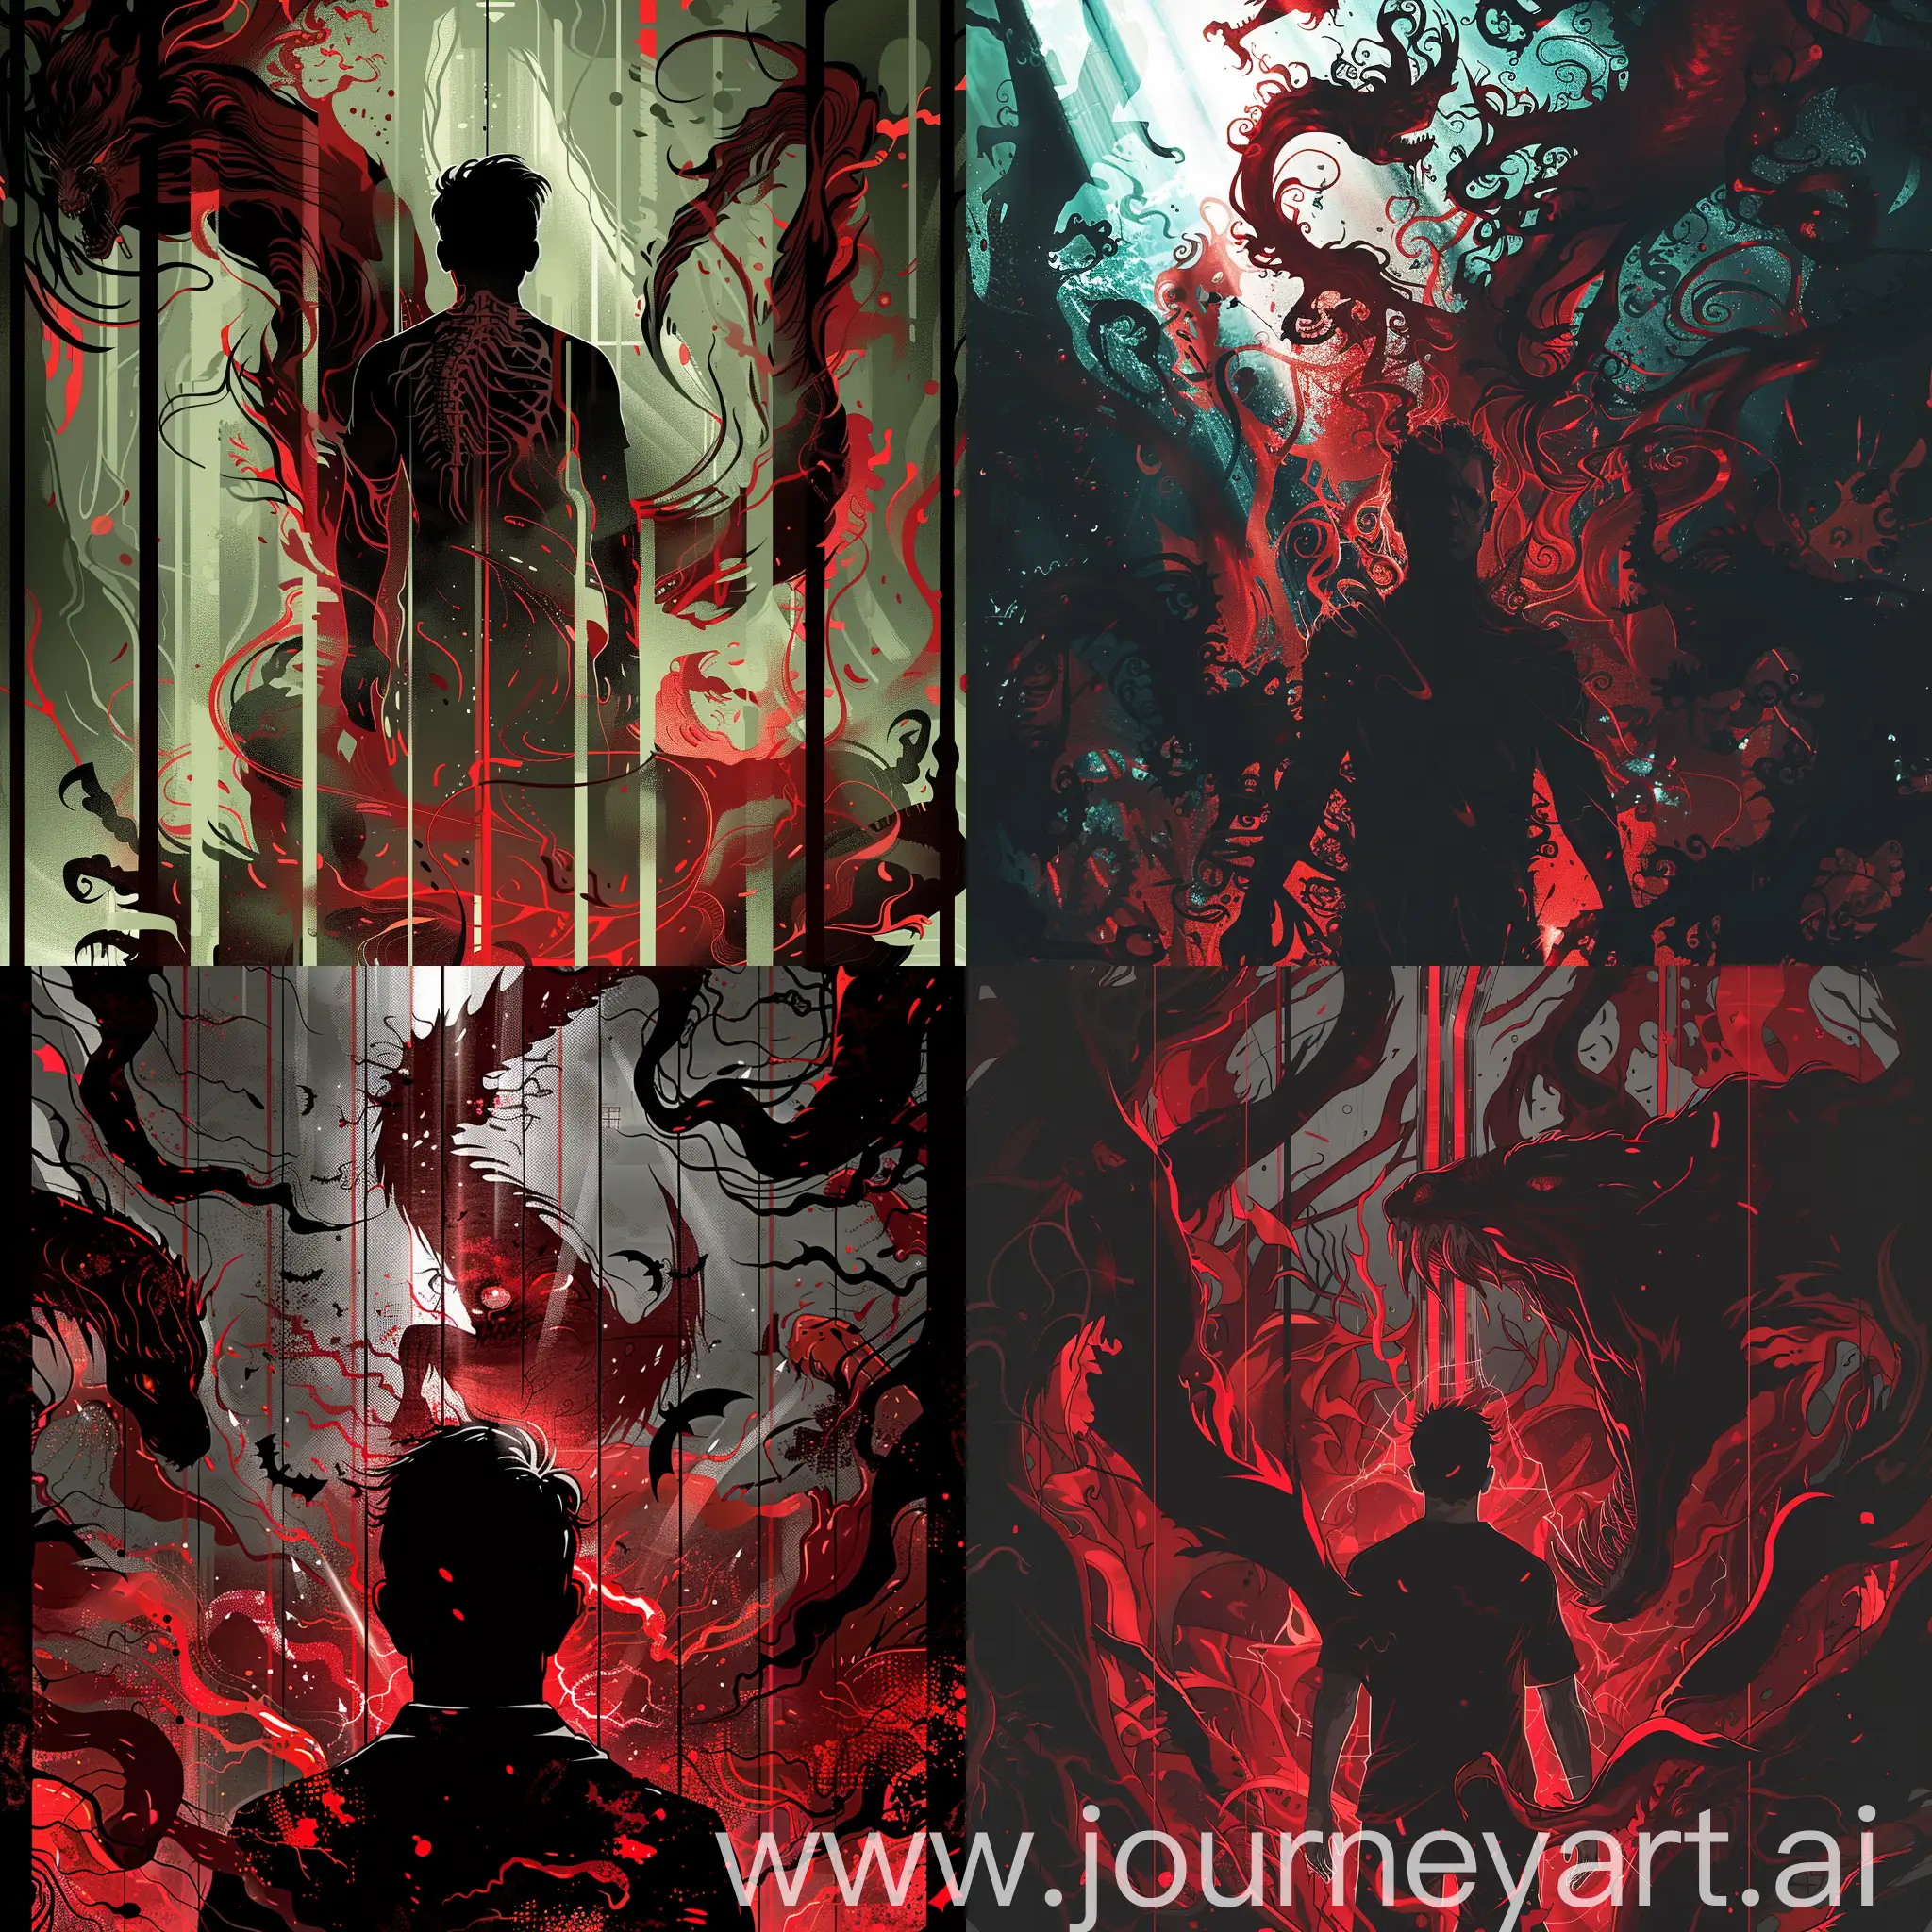 Sinister-Silhouette-Mysterious-Man-Encounters-Menacing-Manticore-in-Red-and-Black-Nightmarish-Scene